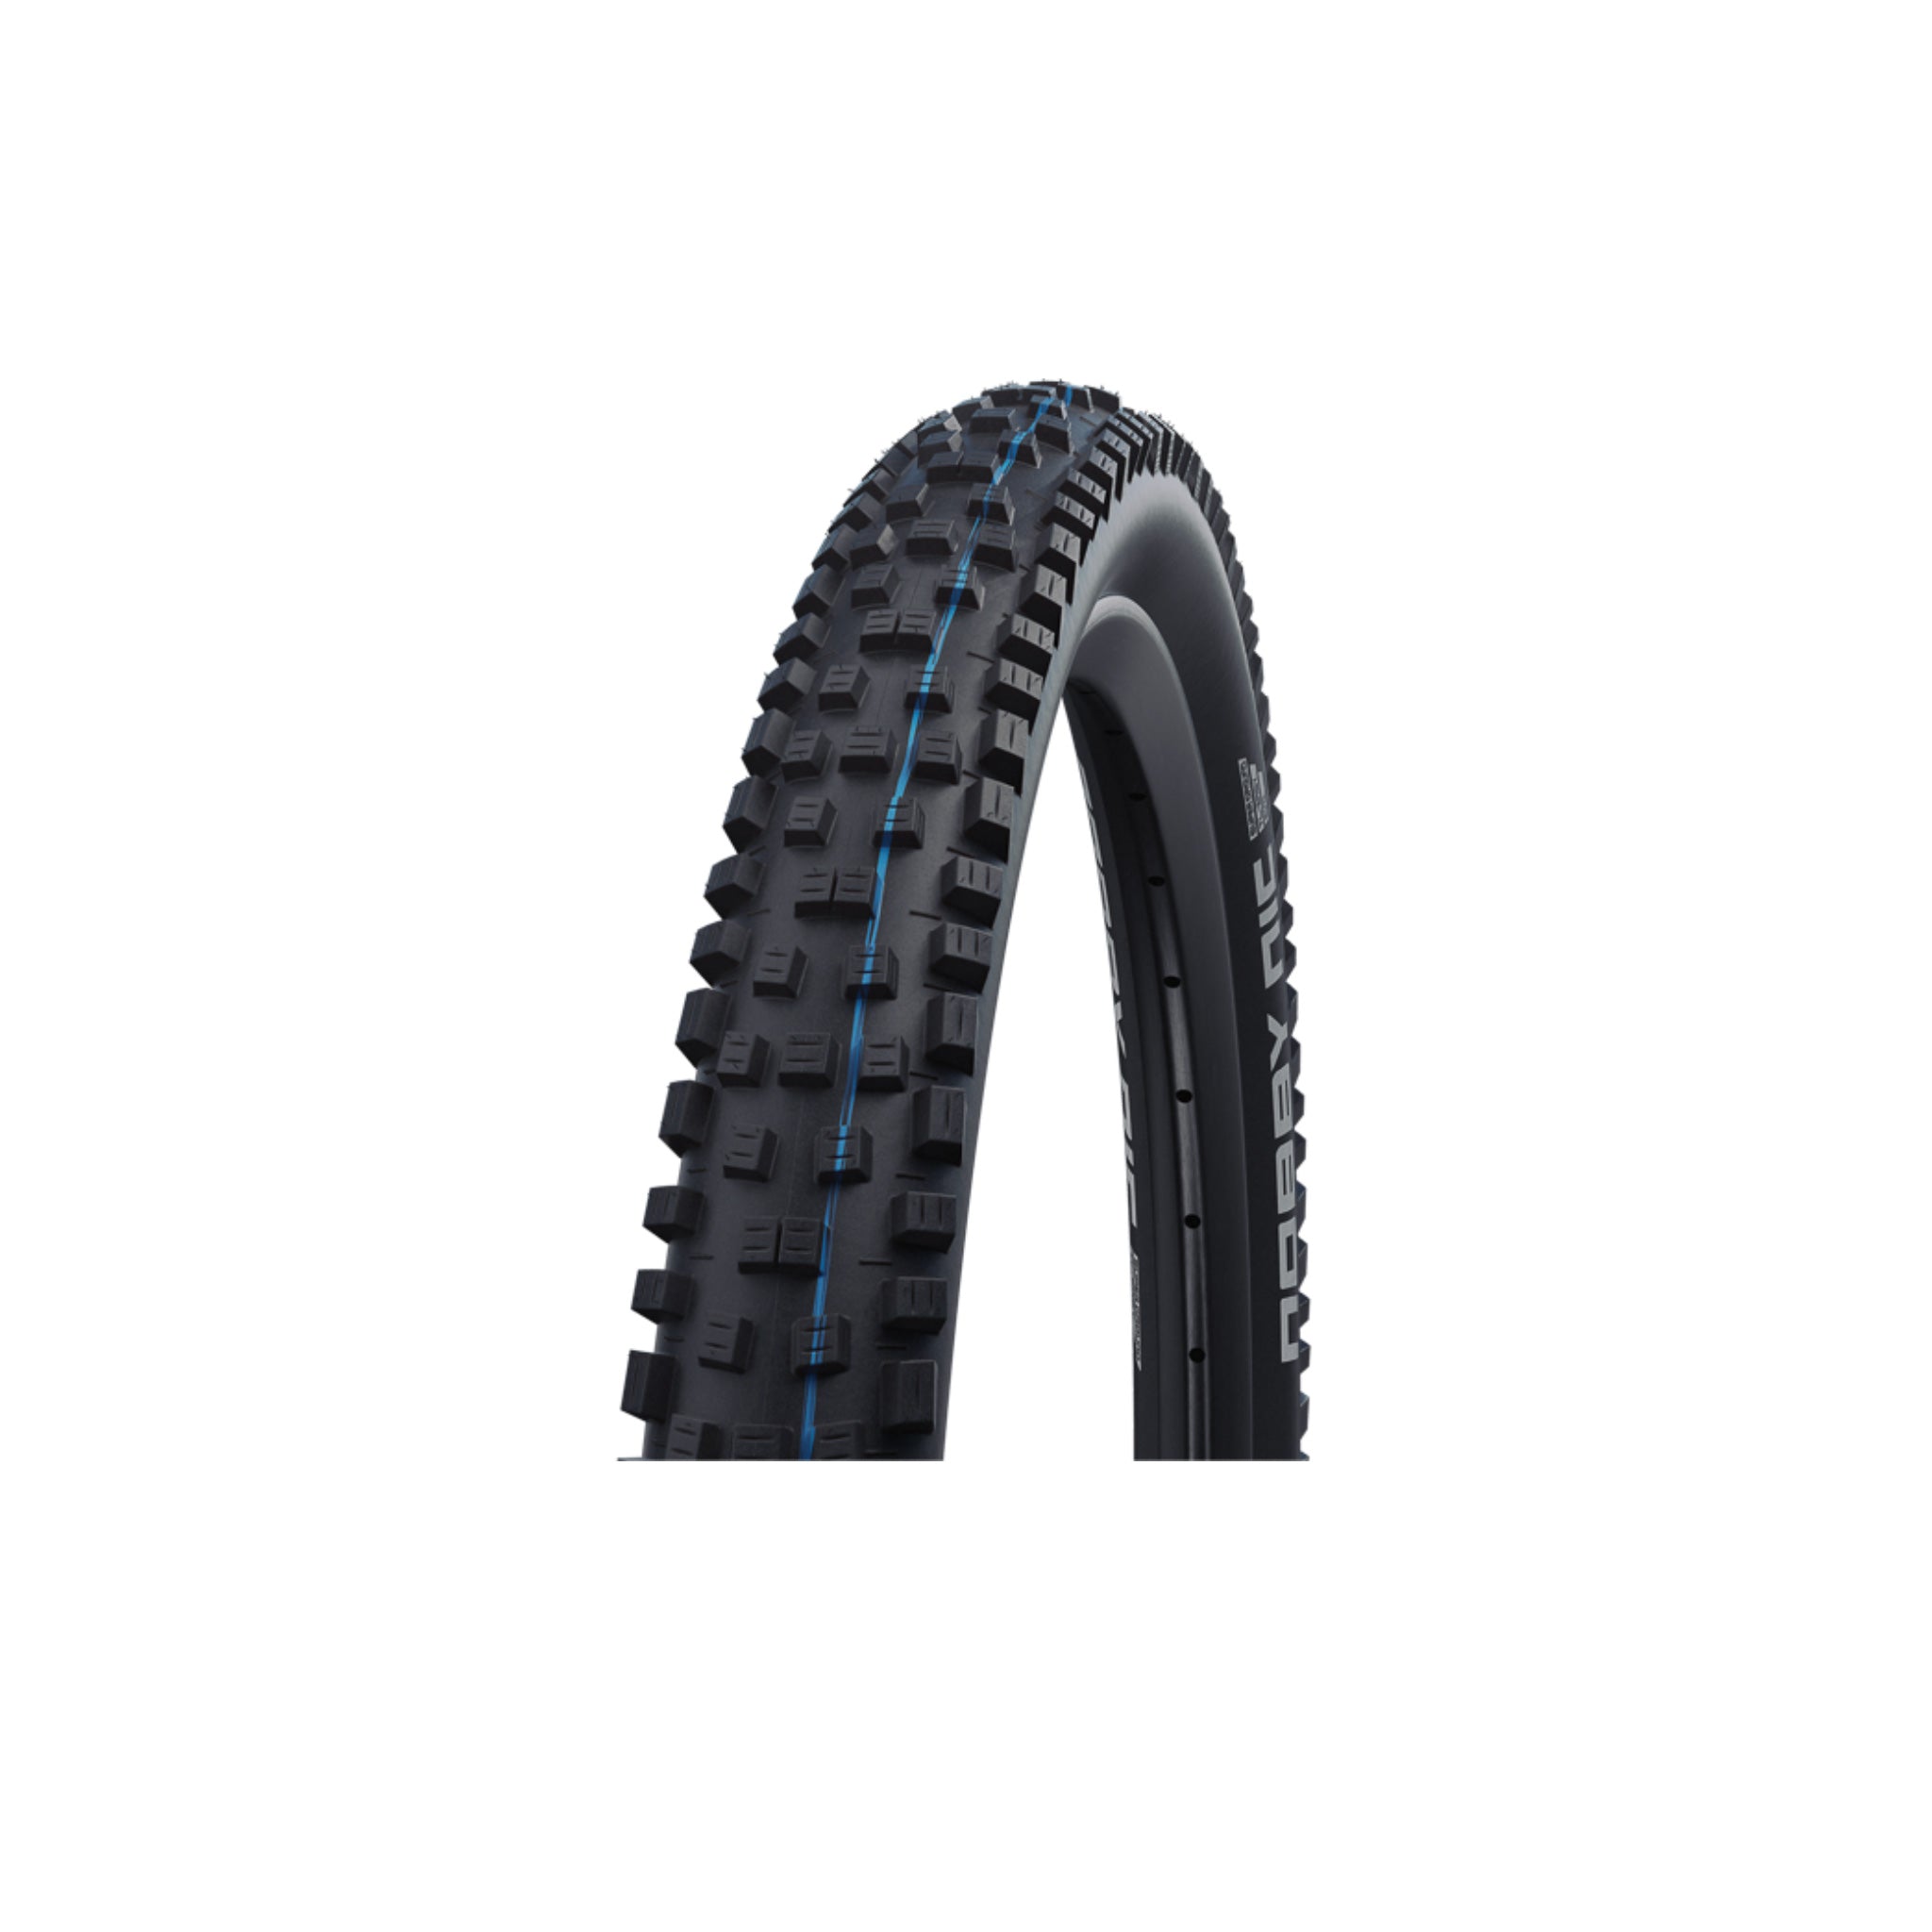 Schwalbe Nobby Nic Super Trail E50 Tire 27.5x2.4" A-Spgrip